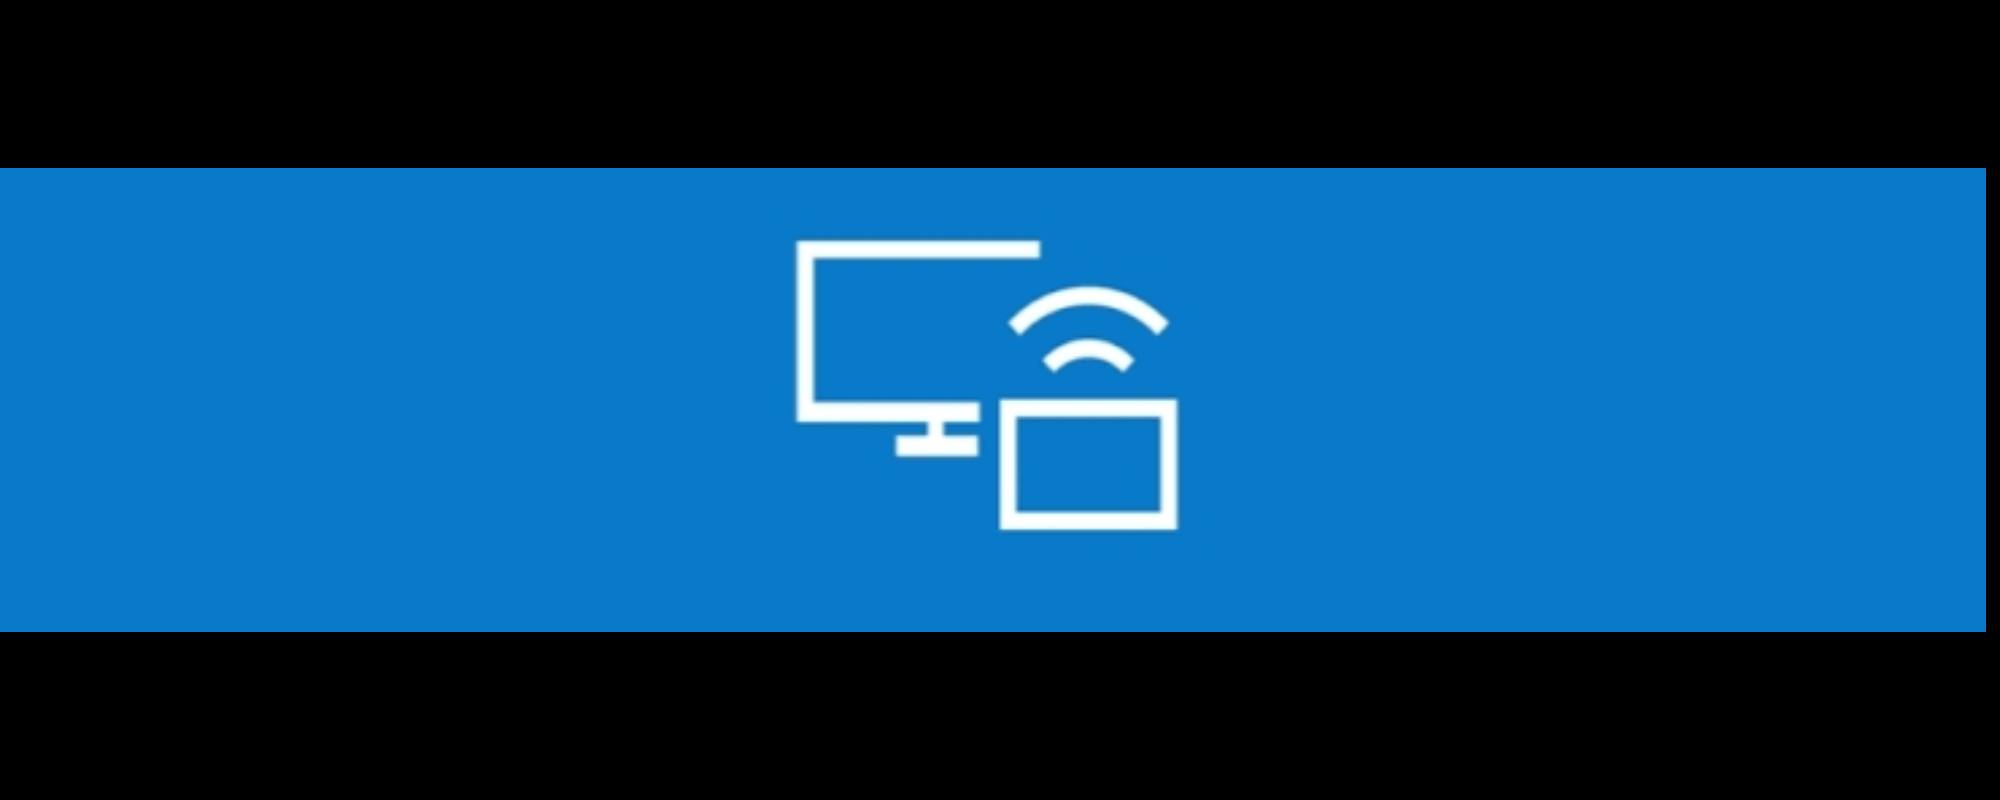 Add and delete Wireless Display feature in your Windows 10 computer